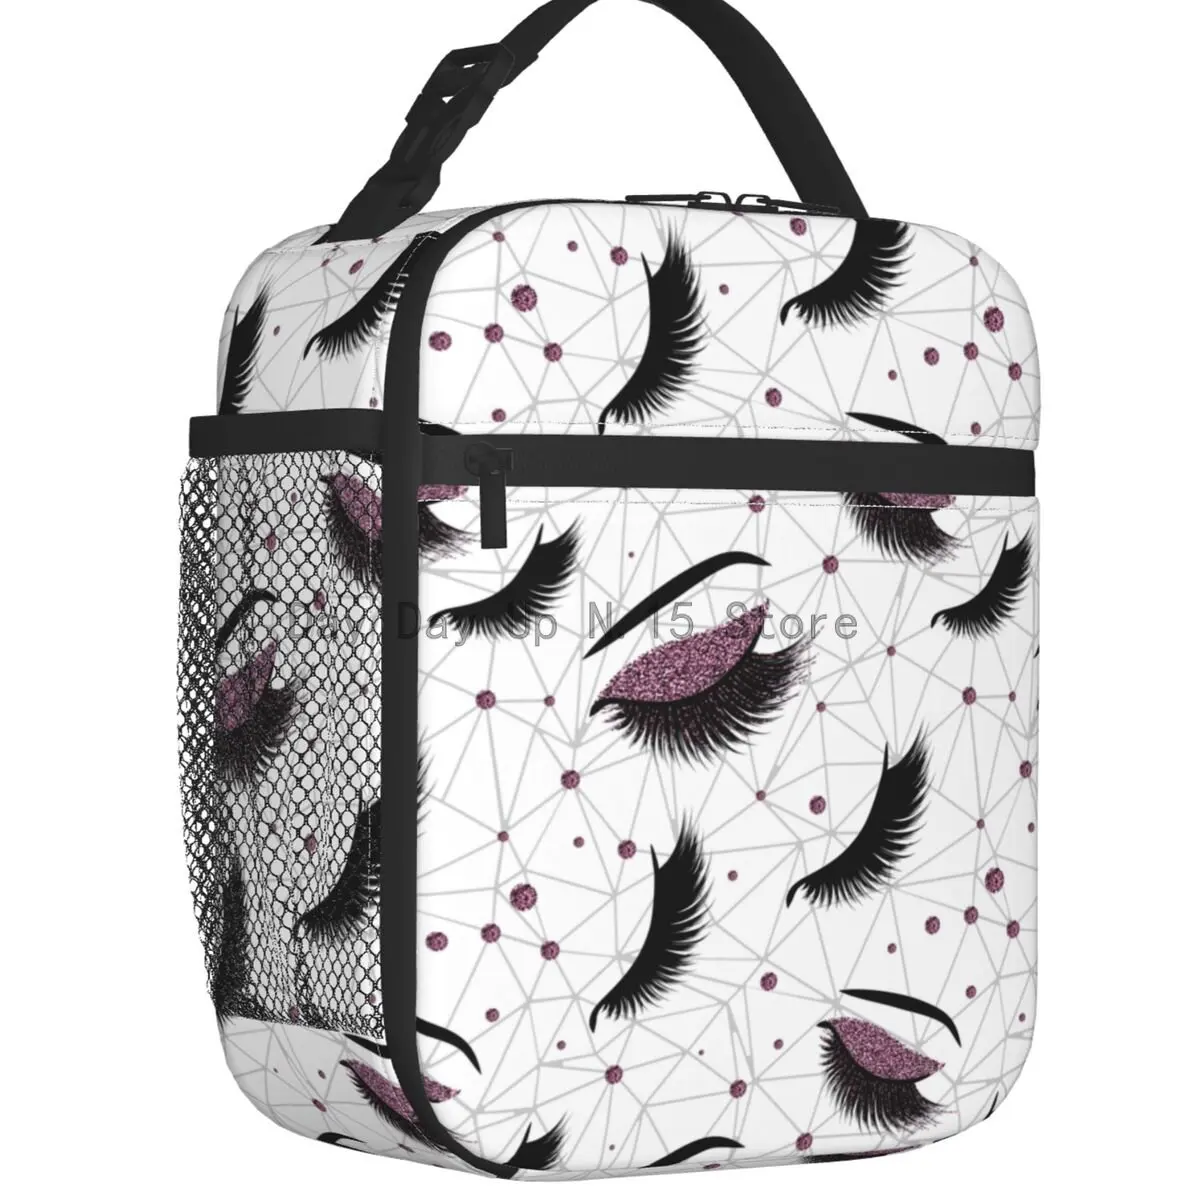 

Eyelash Eyes Thermal Insulated Lunch Bags Burgundy Lashes Seamless Pattern Lunch Tote Work School Travel Multifunction Food Box